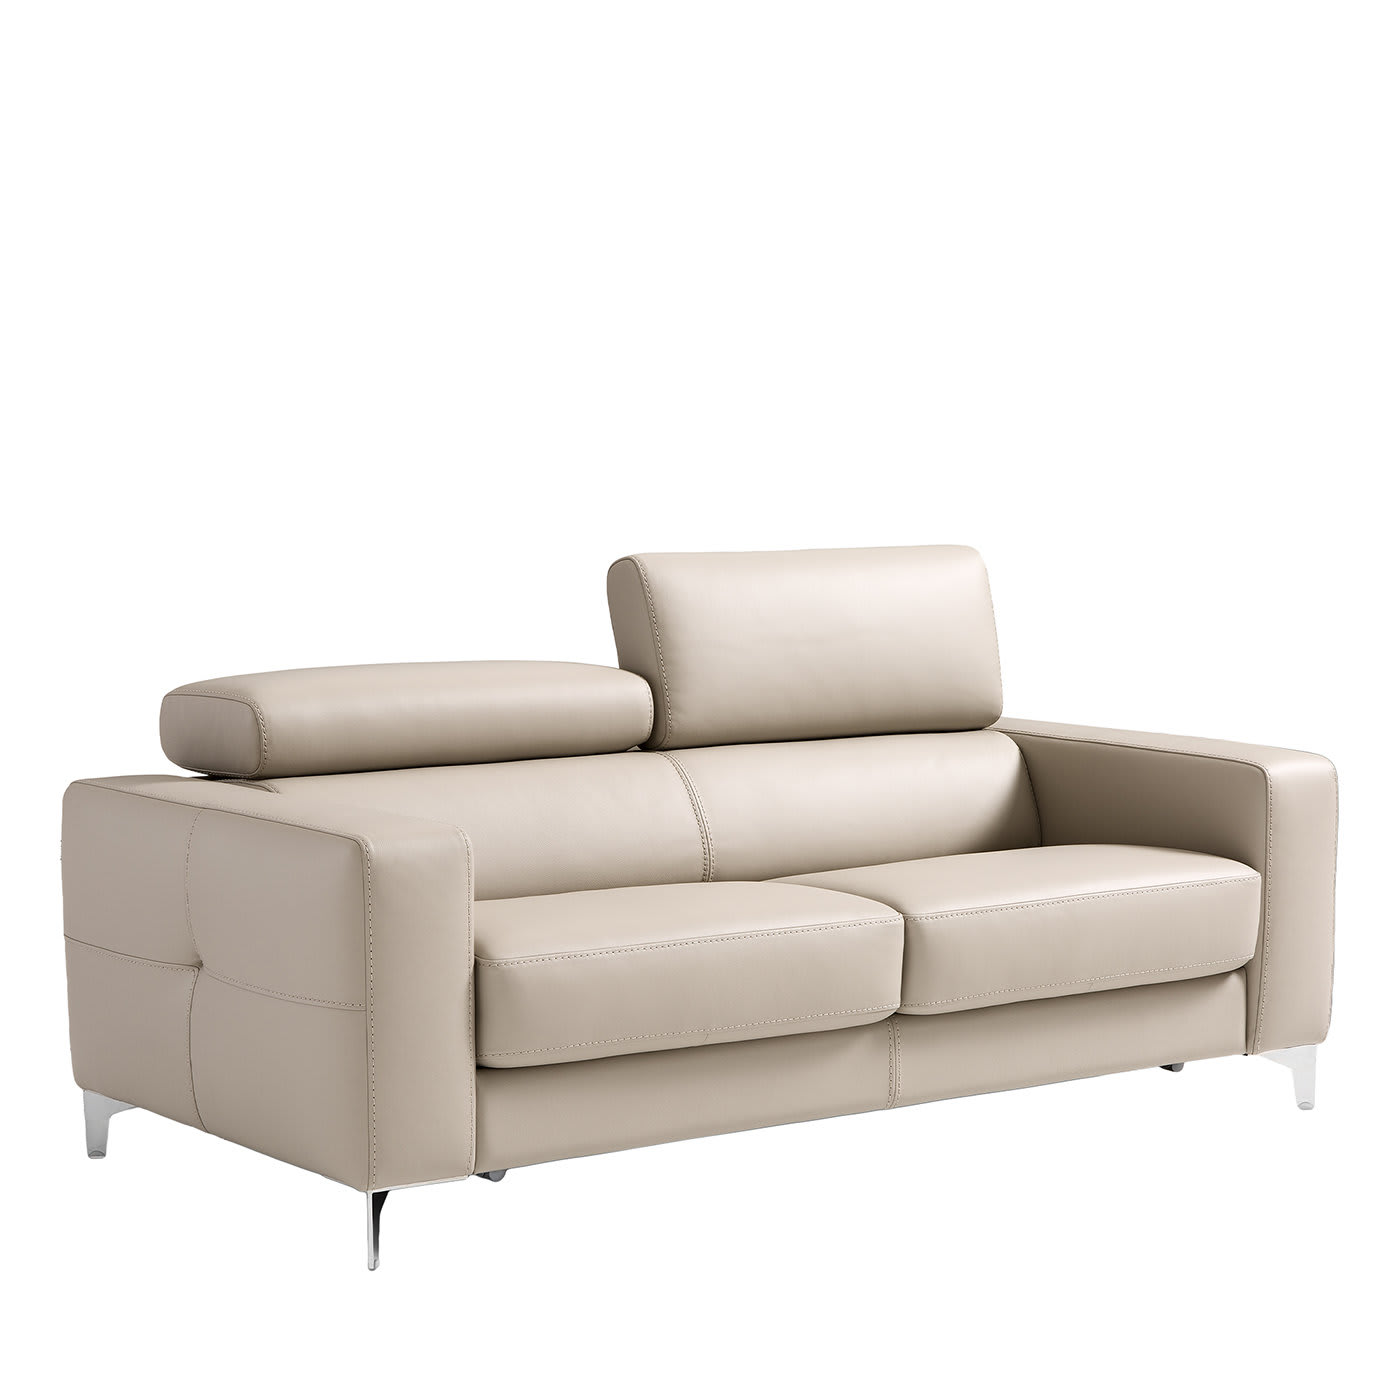 Verona Beige Leather 2 Seater Sofa Bed, Leather 2 Seater Sofa Bed